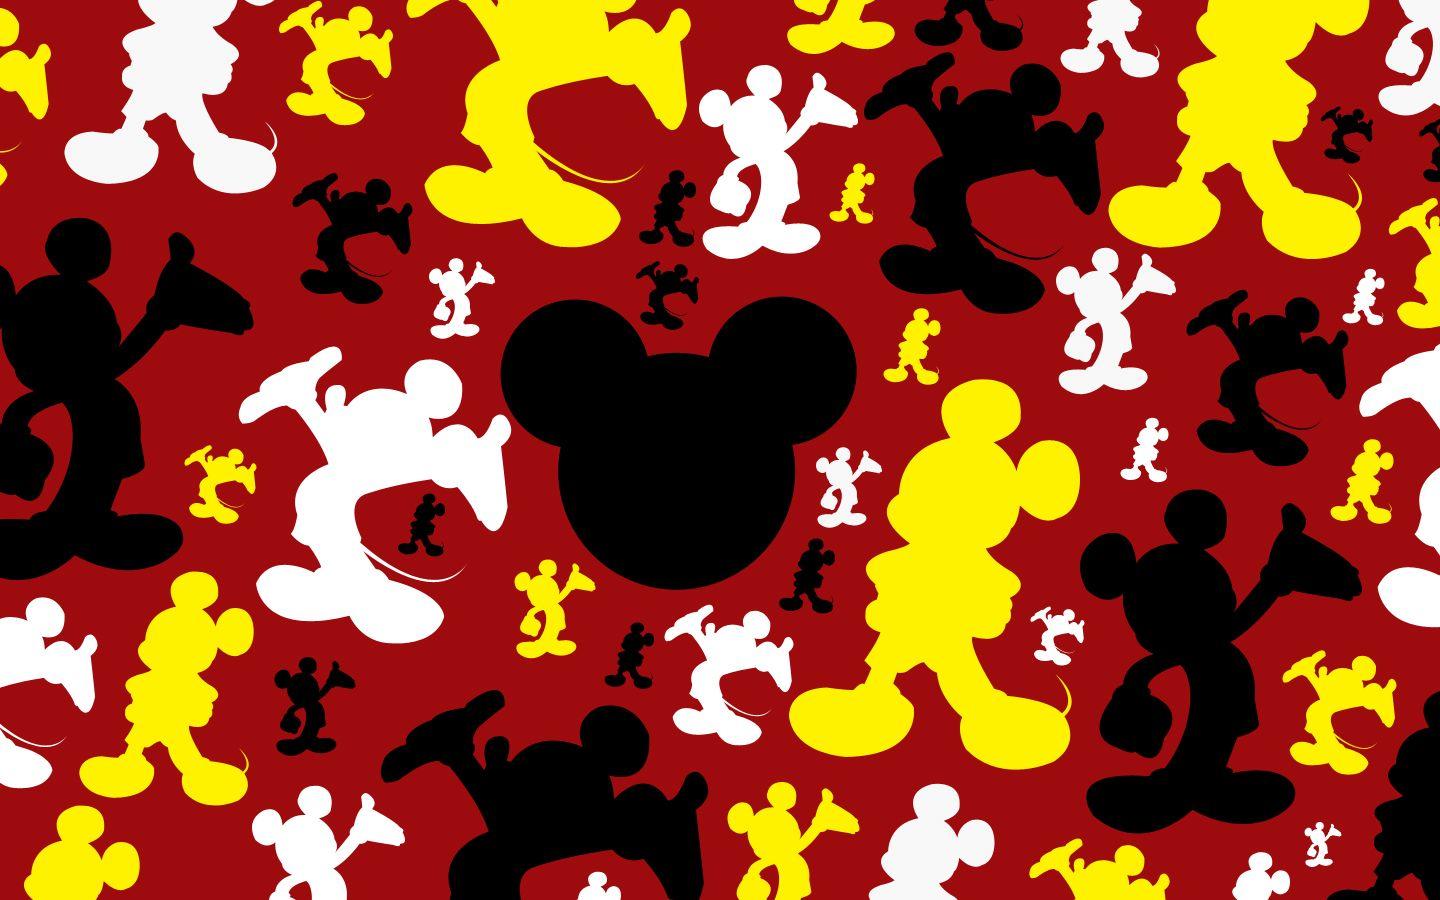 Mickey Mouse Pattern Of Red, Black And Yellow Polka Dots On A